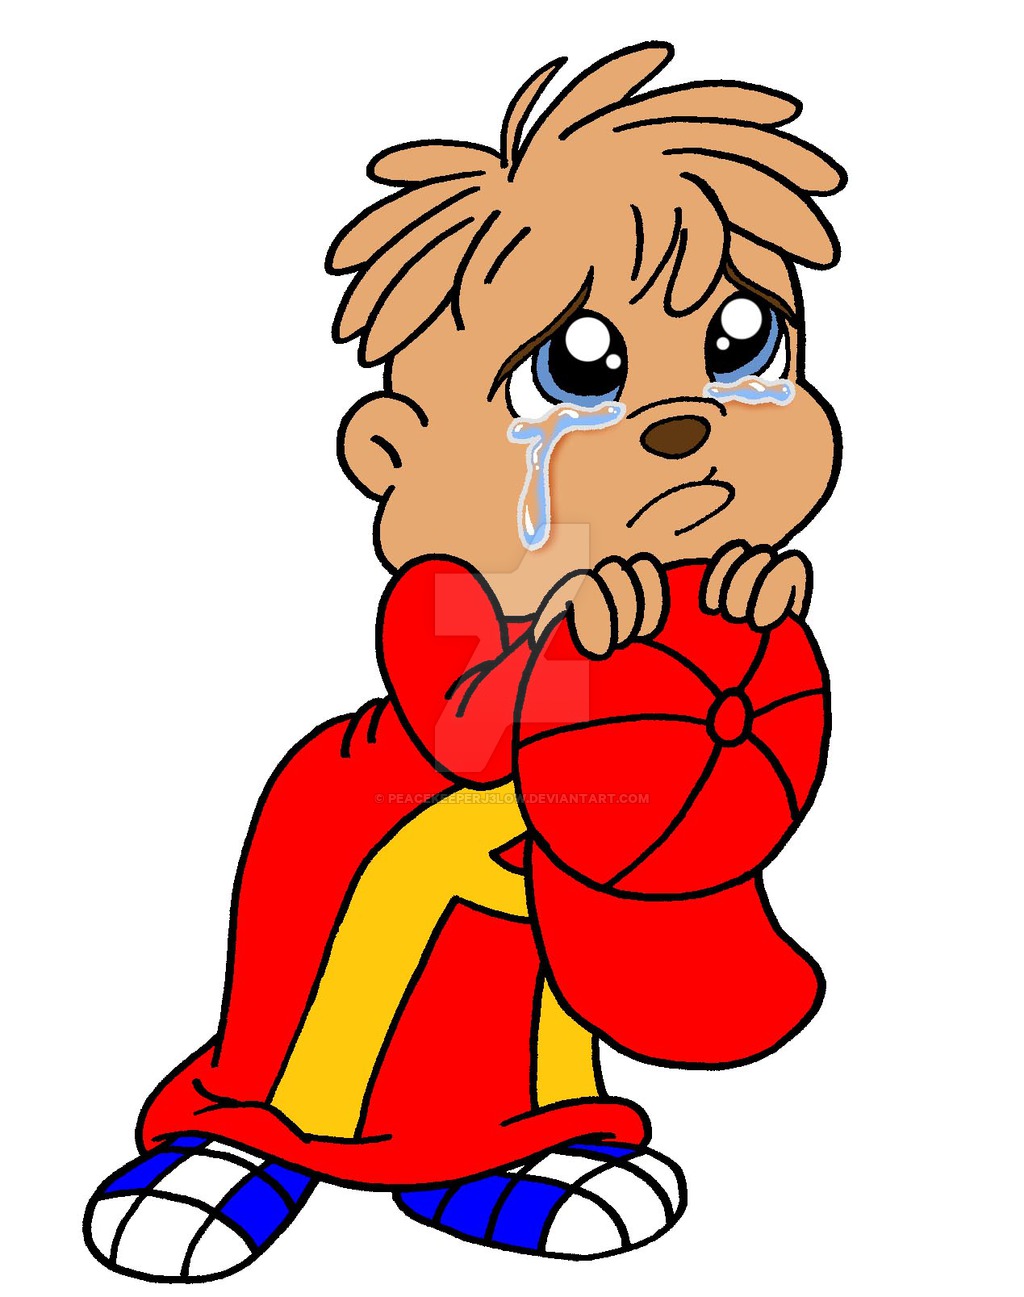 A very alvin by. Chipmunk clipart sad